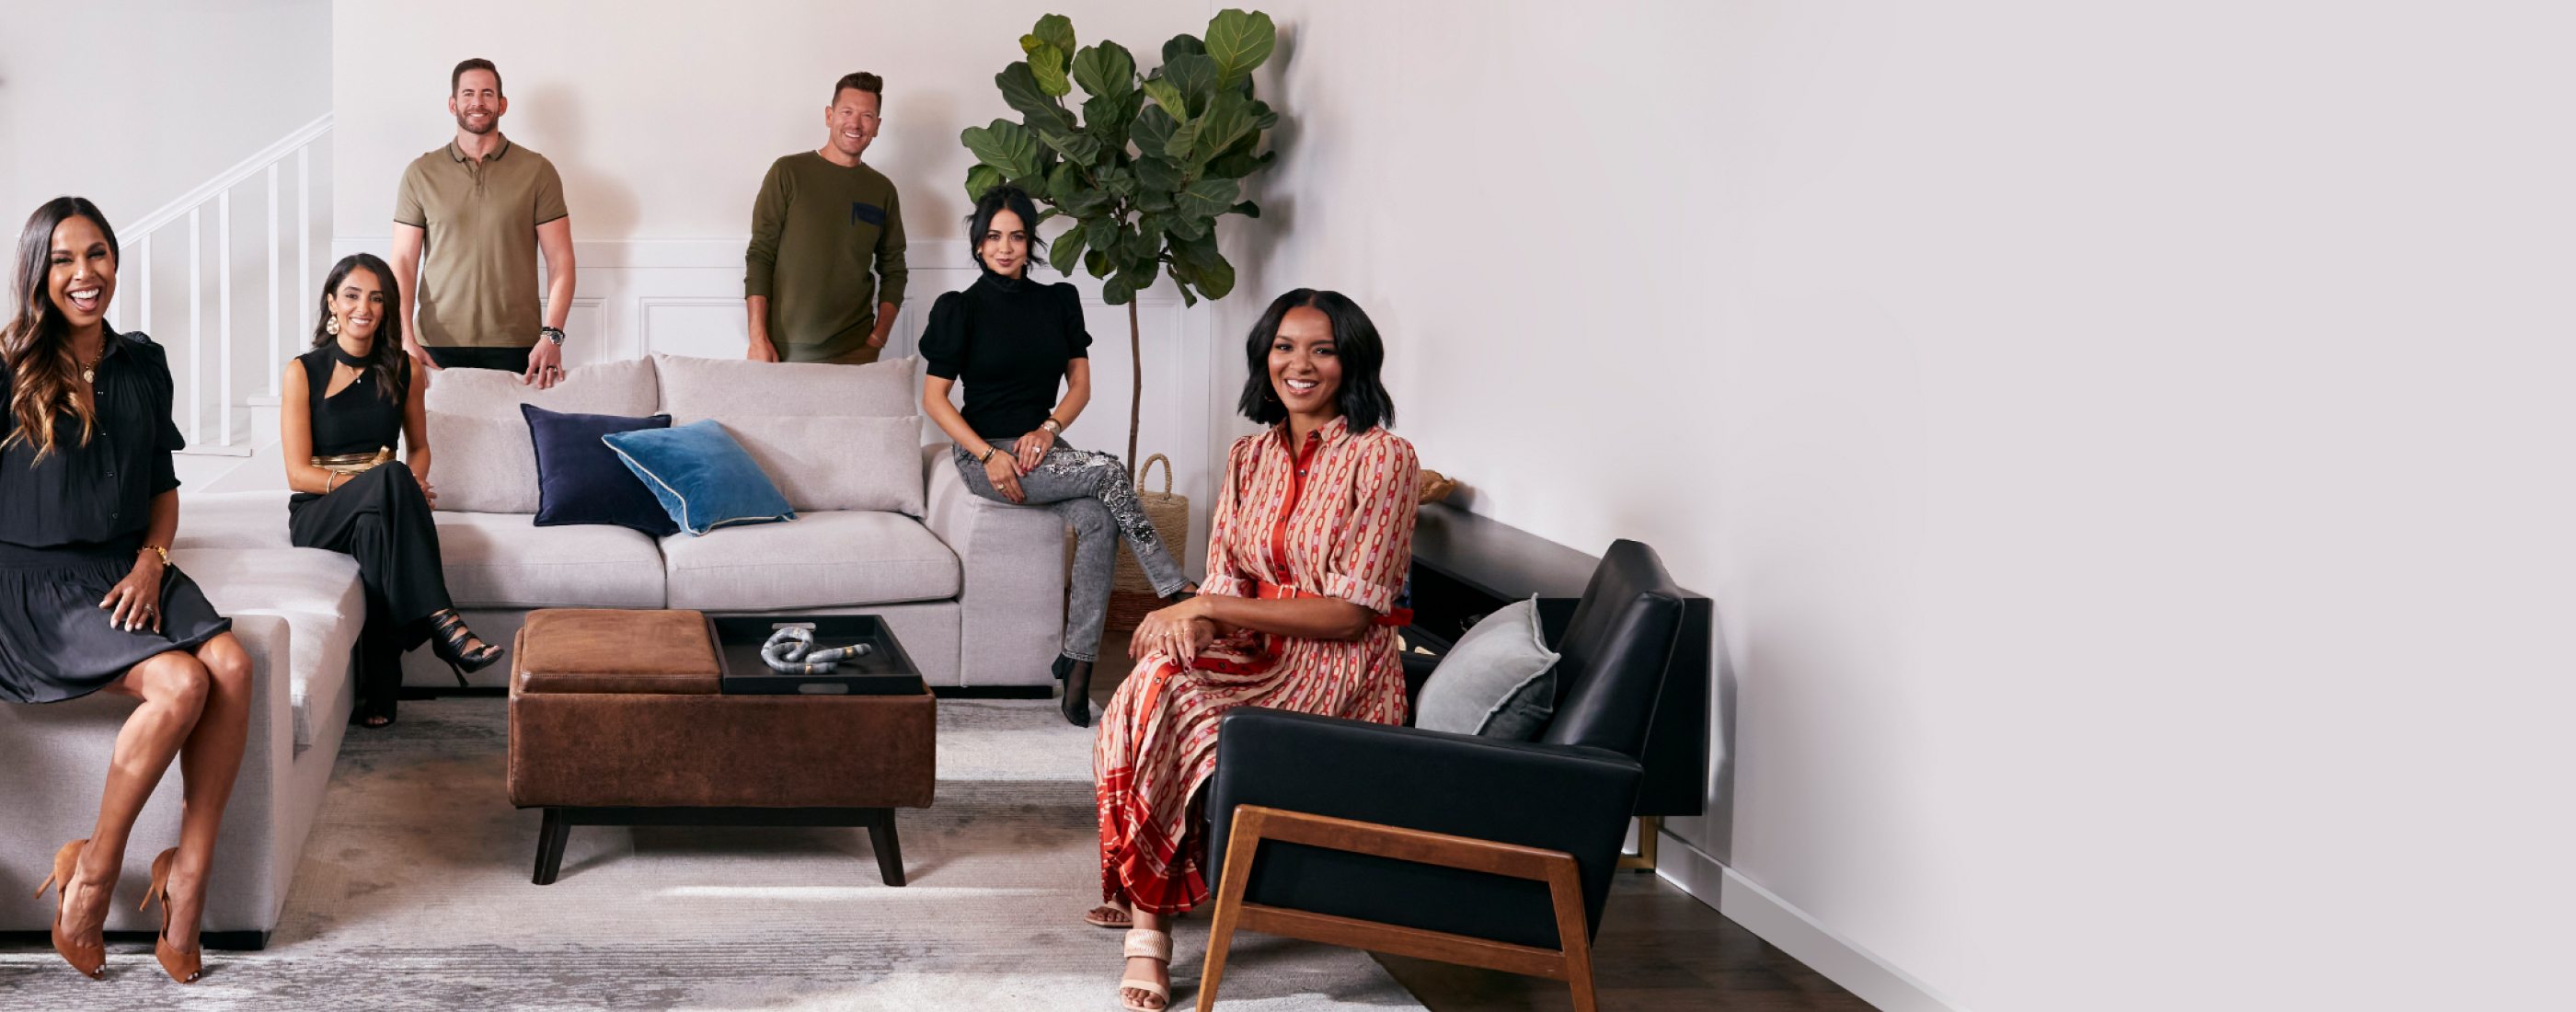 Overstock brand ambassadors. We've partnered with six home experts to help make your shopping decisions a little easier. Learn More.